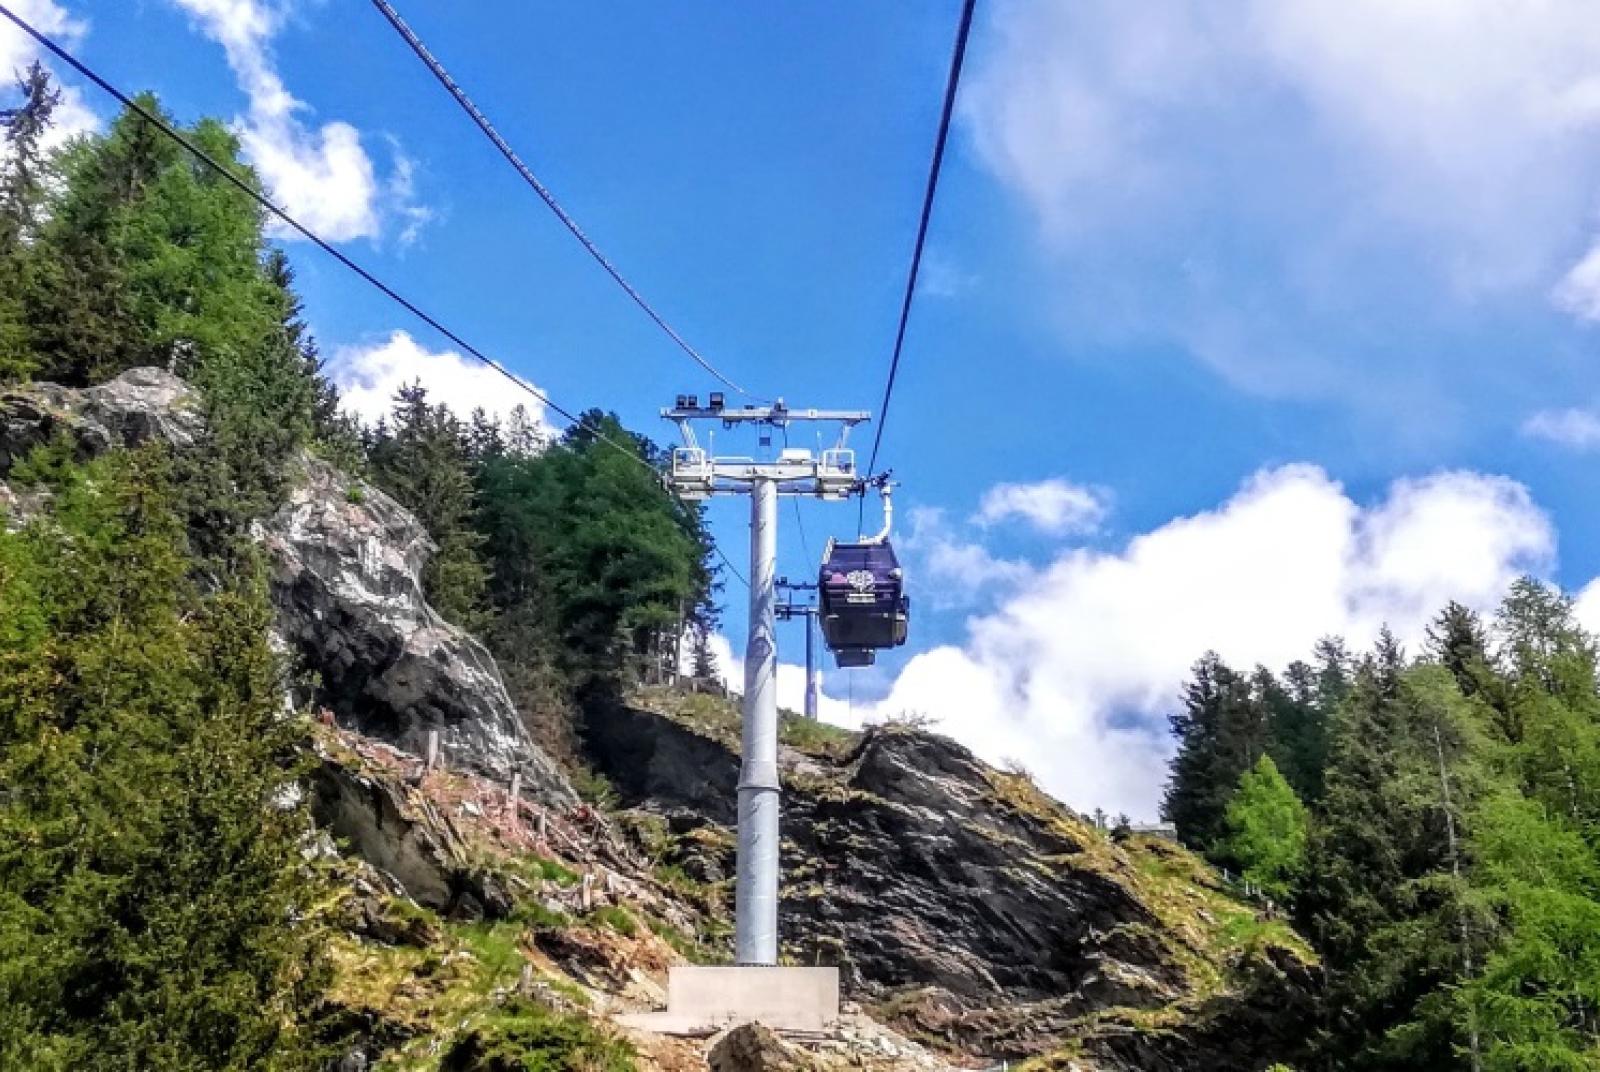 Autumn time for the Champoluc-Crest cable car